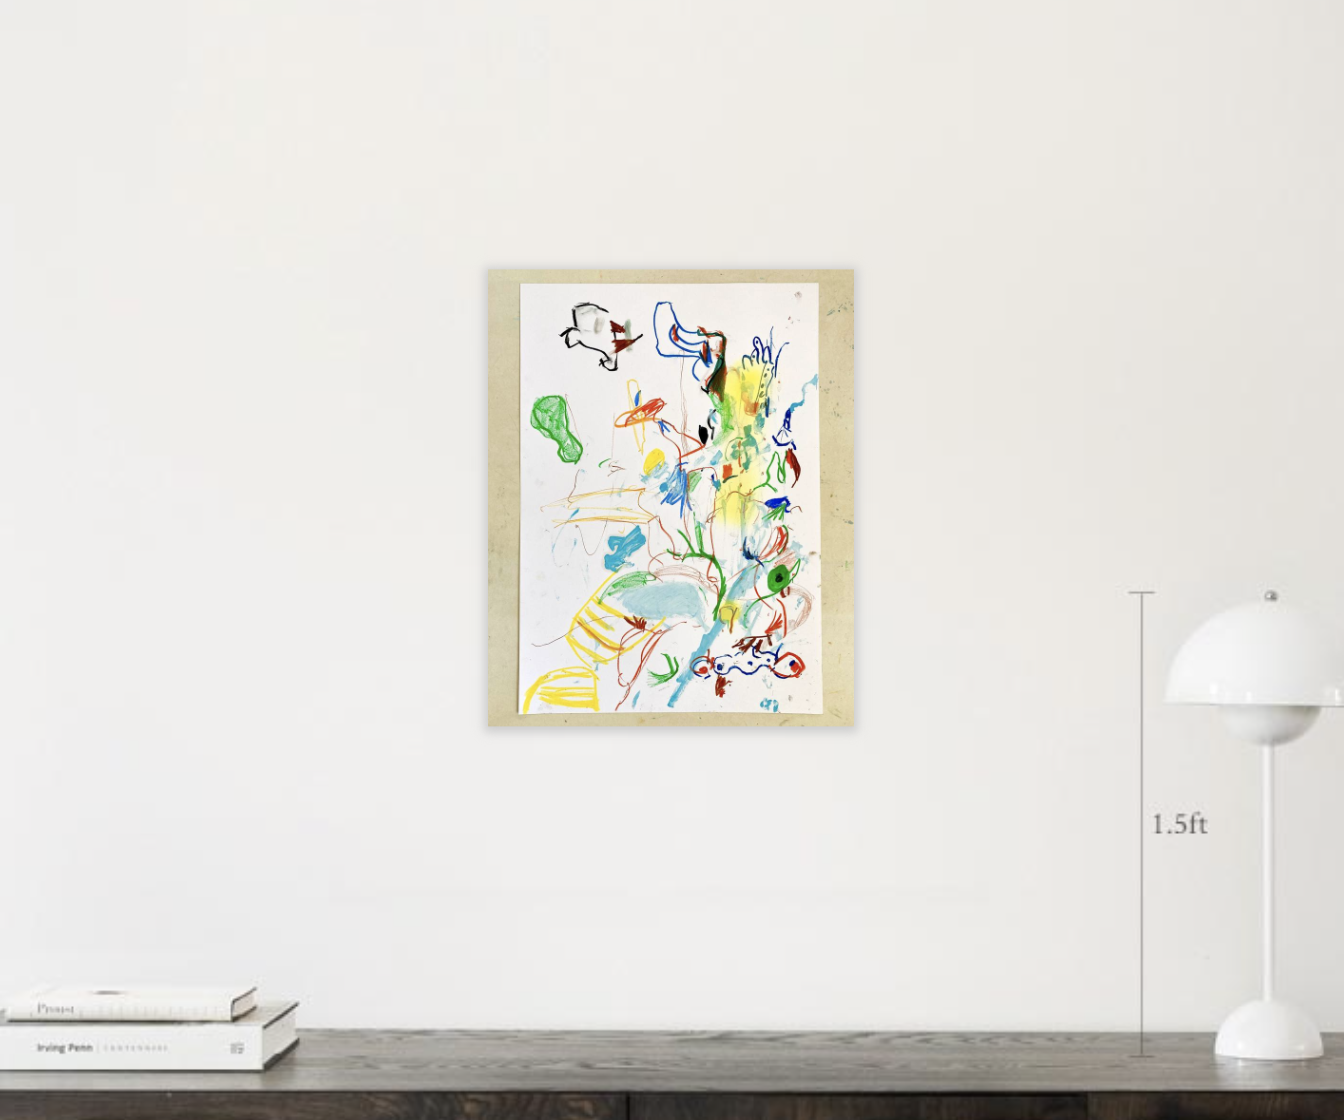 Framed abstract painting on a wall above a white book and lamp, showcasing a sale on home decor art